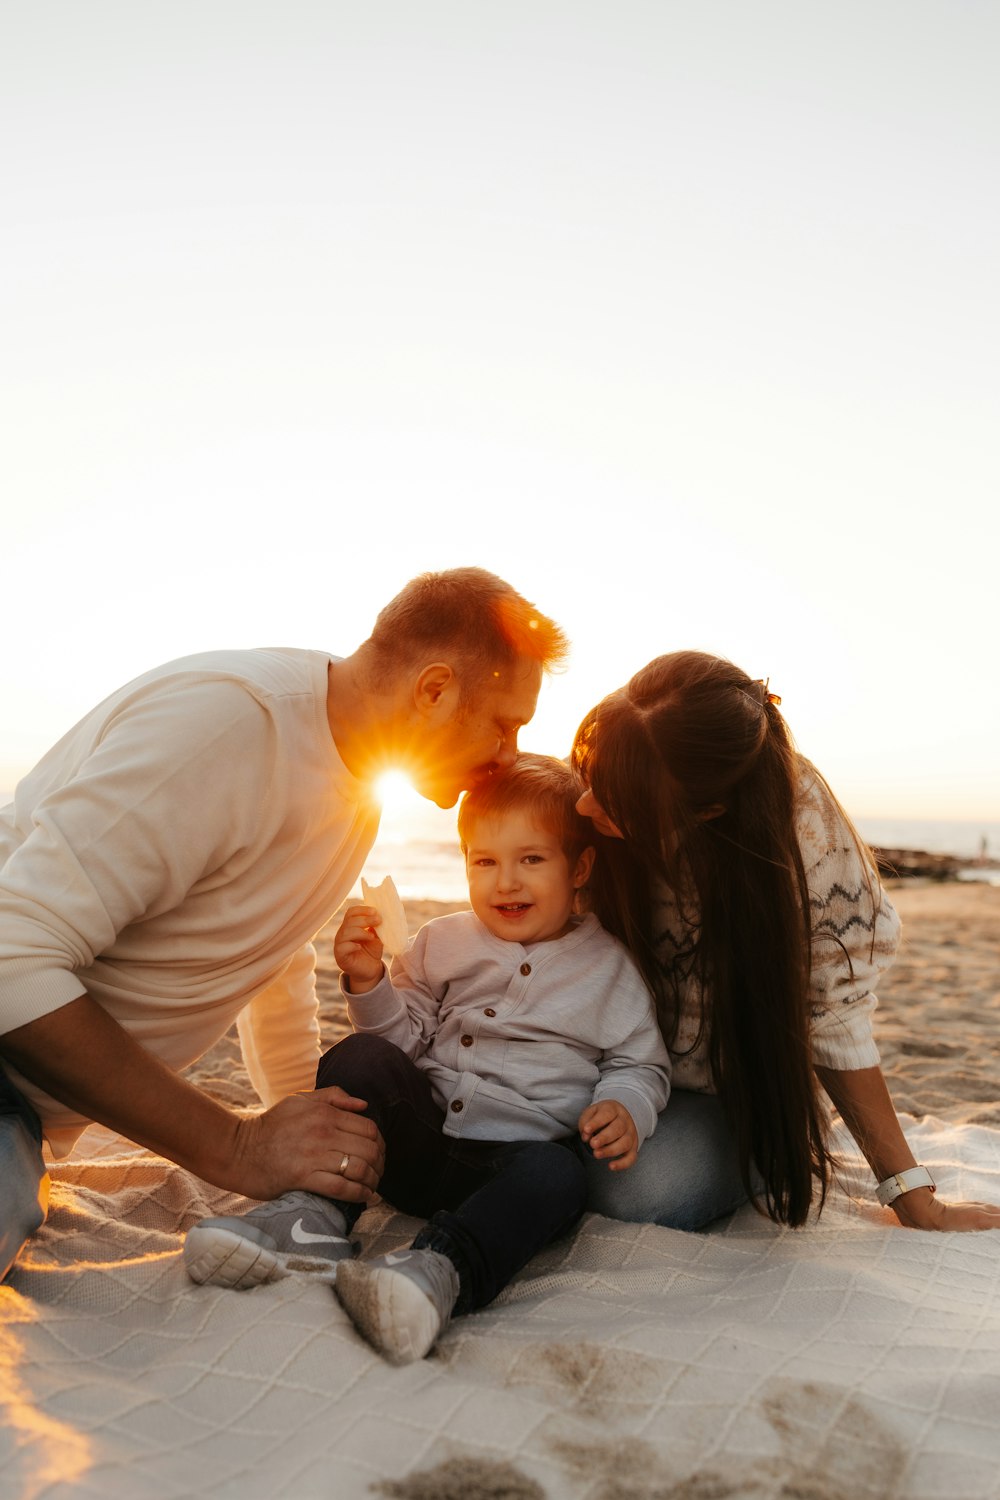 a man, woman and baby on the beach at sunset